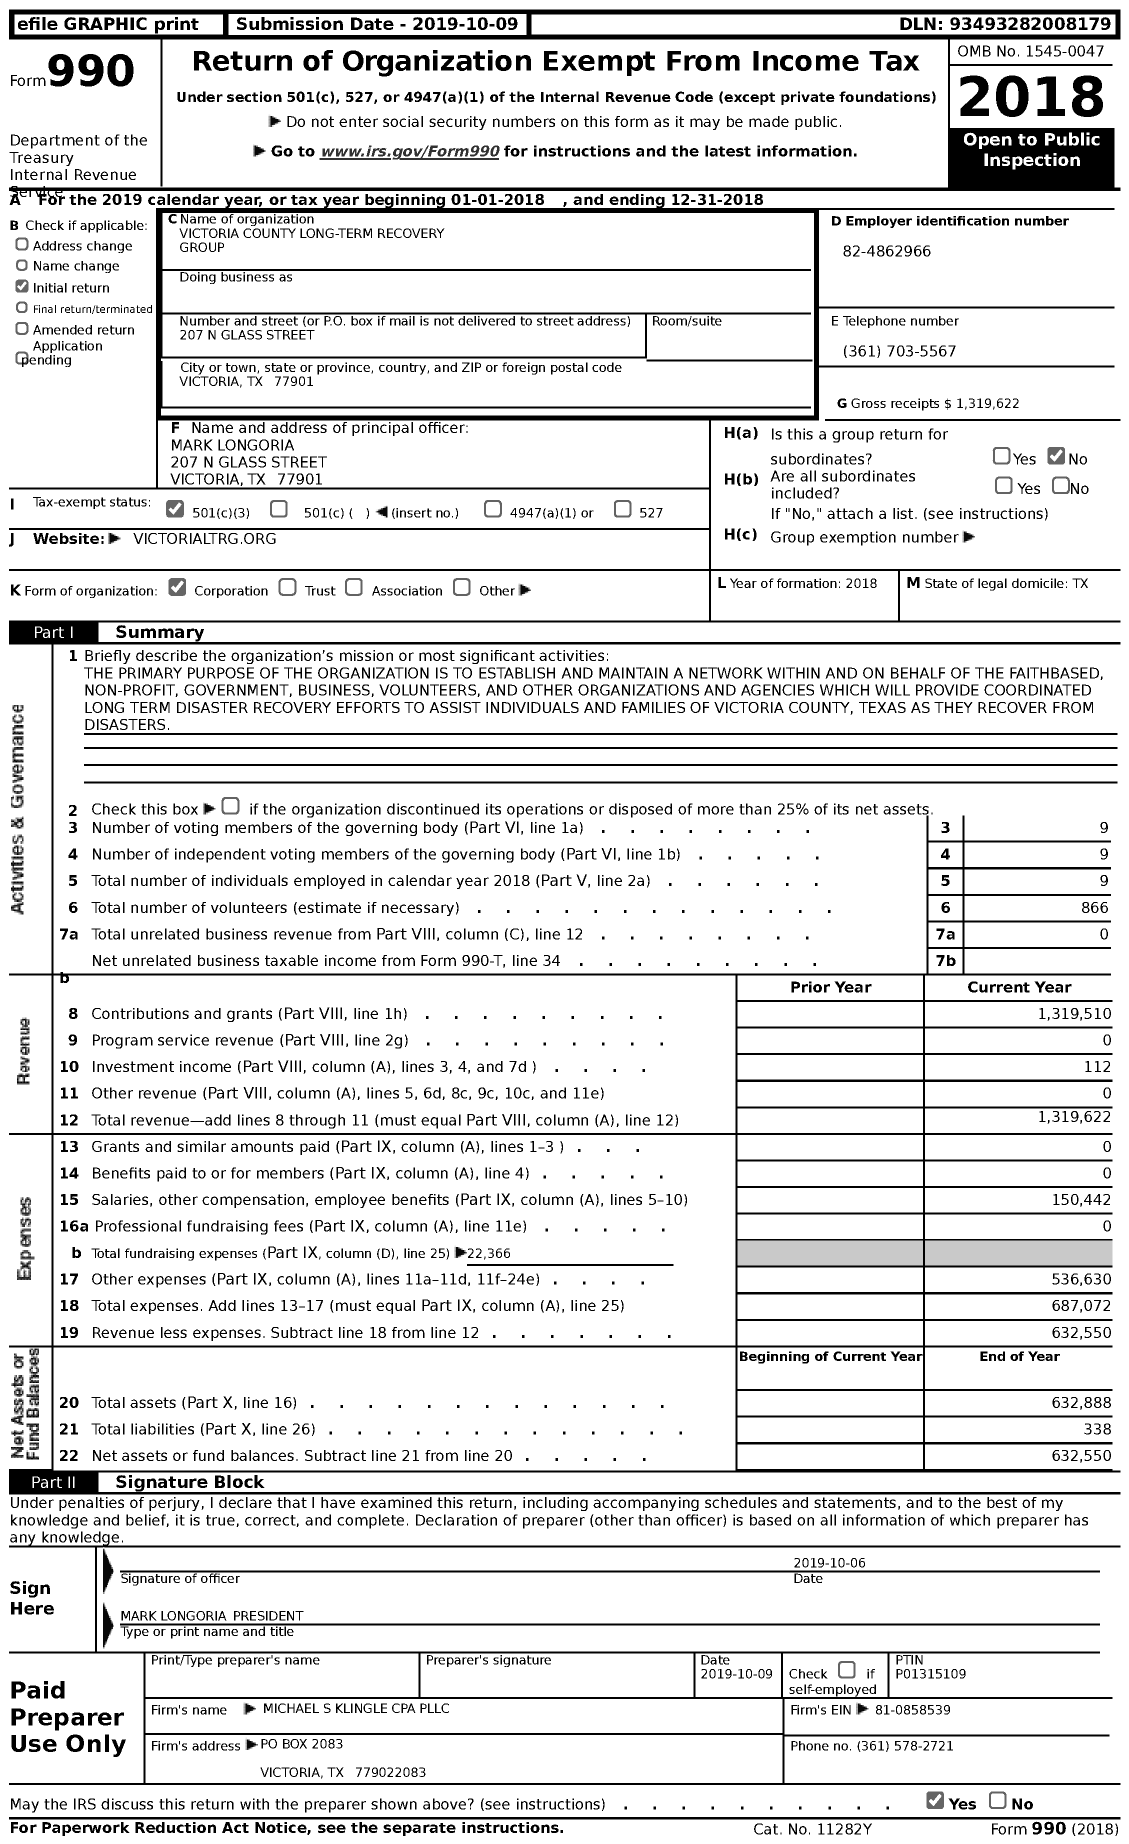 Image of first page of 2018 Form 990 for Victoria County Long-Term Recovery Group